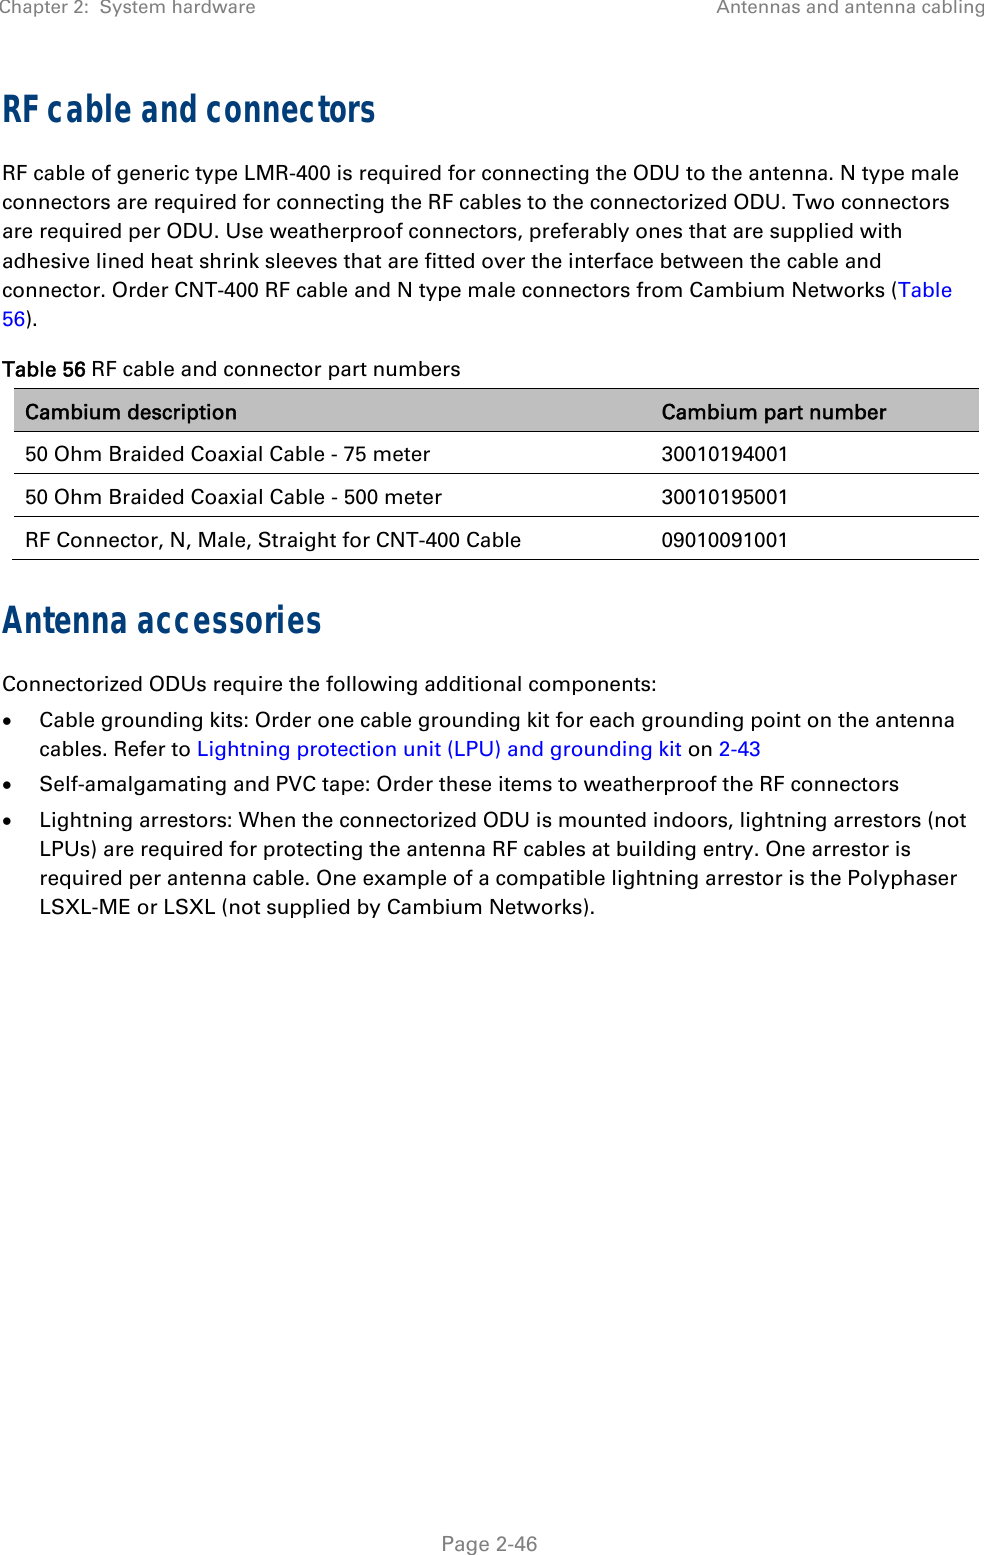 Chapter 2:  System hardware  Antennas and antenna cabling   Page 2-46 RF cable and connectors RF cable of generic type LMR-400 is required for connecting the ODU to the antenna. N type male connectors are required for connecting the RF cables to the connectorized ODU. Two connectors are required per ODU. Use weatherproof connectors, preferably ones that are supplied with adhesive lined heat shrink sleeves that are fitted over the interface between the cable and connector. Order CNT-400 RF cable and N type male connectors from Cambium Networks (Table 56). Table 56 RF cable and connector part numbers Cambium description  Cambium part number 50 Ohm Braided Coaxial Cable - 75 meter 30010194001 50 Ohm Braided Coaxial Cable - 500 meter 30010195001 RF Connector, N, Male, Straight for CNT-400 Cable  09010091001 Antenna accessories Connectorized ODUs require the following additional components:  Cable grounding kits: Order one cable grounding kit for each grounding point on the antenna cables. Refer to Lightning protection unit (LPU) and grounding kit on 2-43  Self-amalgamating and PVC tape: Order these items to weatherproof the RF connectors  Lightning arrestors: When the connectorized ODU is mounted indoors, lightning arrestors (not LPUs) are required for protecting the antenna RF cables at building entry. One arrestor is required per antenna cable. One example of a compatible lightning arrestor is the Polyphaser LSXL-ME or LSXL (not supplied by Cambium Networks). 